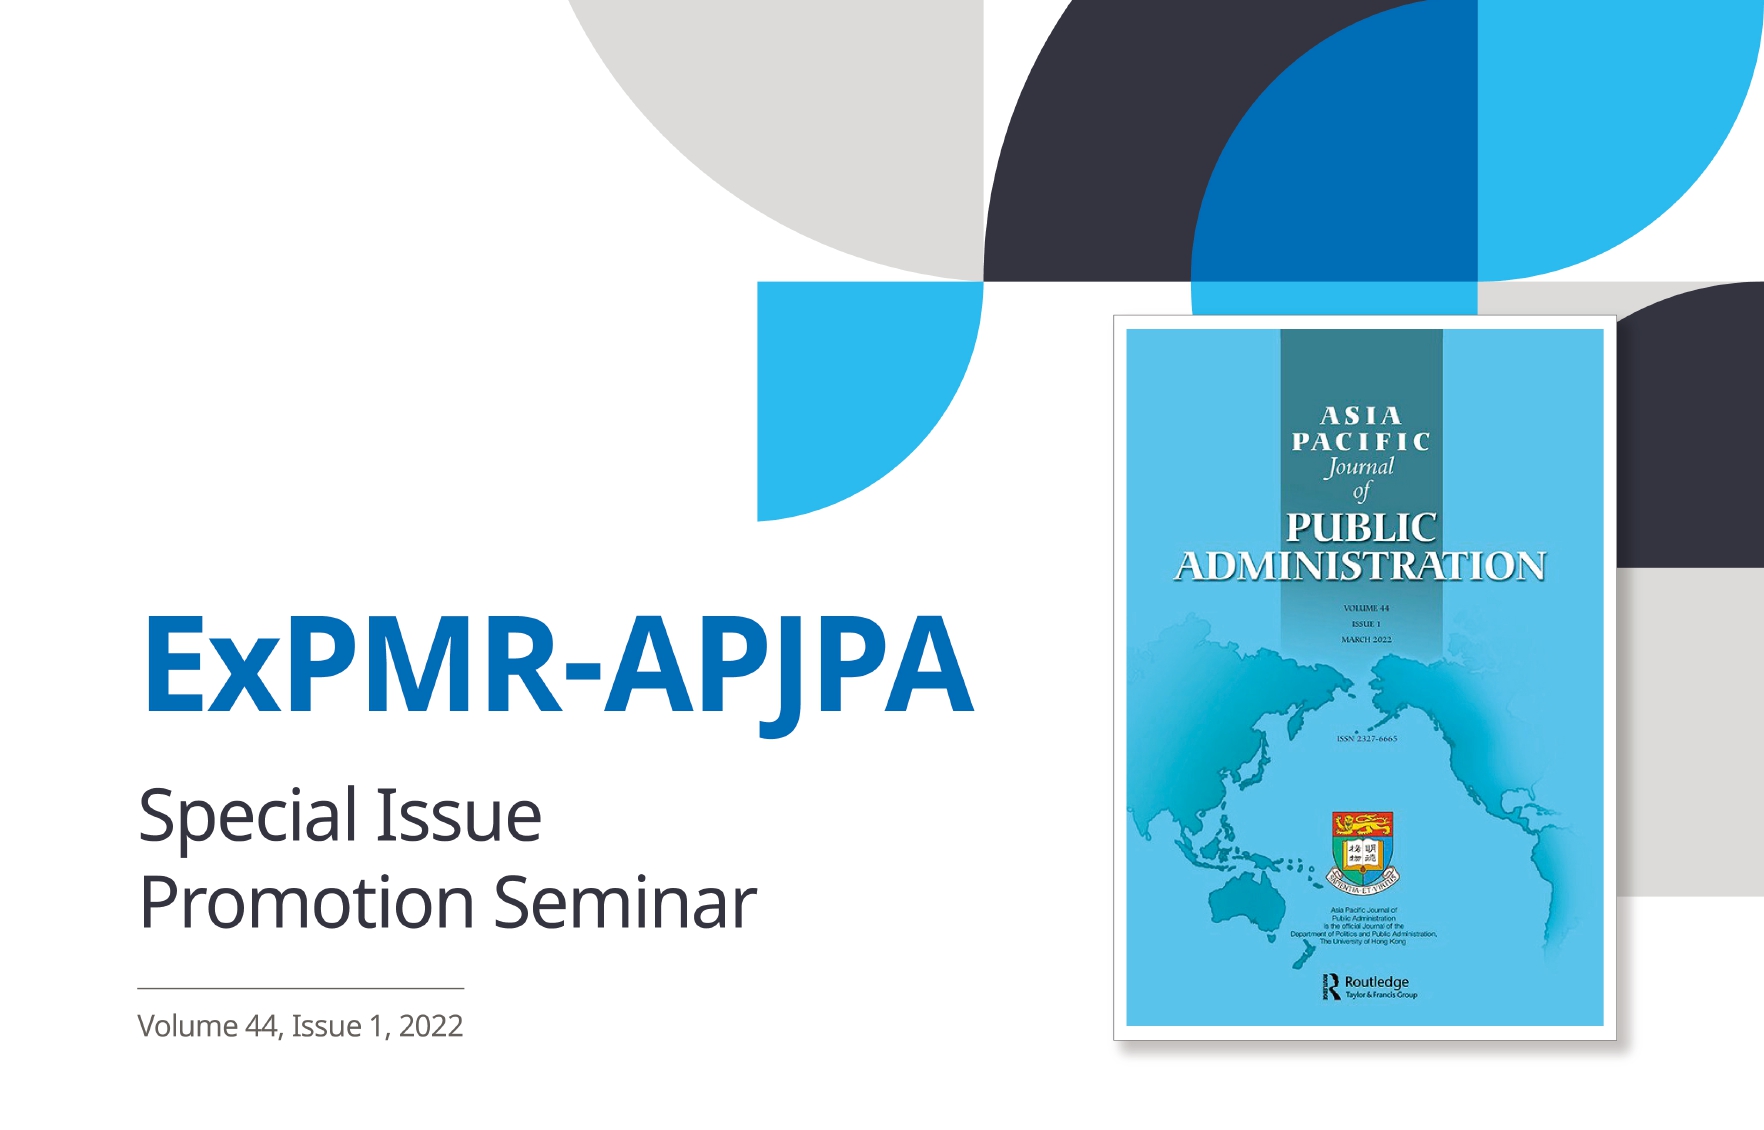 Asia Pacific Journal of Public Administration (APJPA) Special Issue Seminar